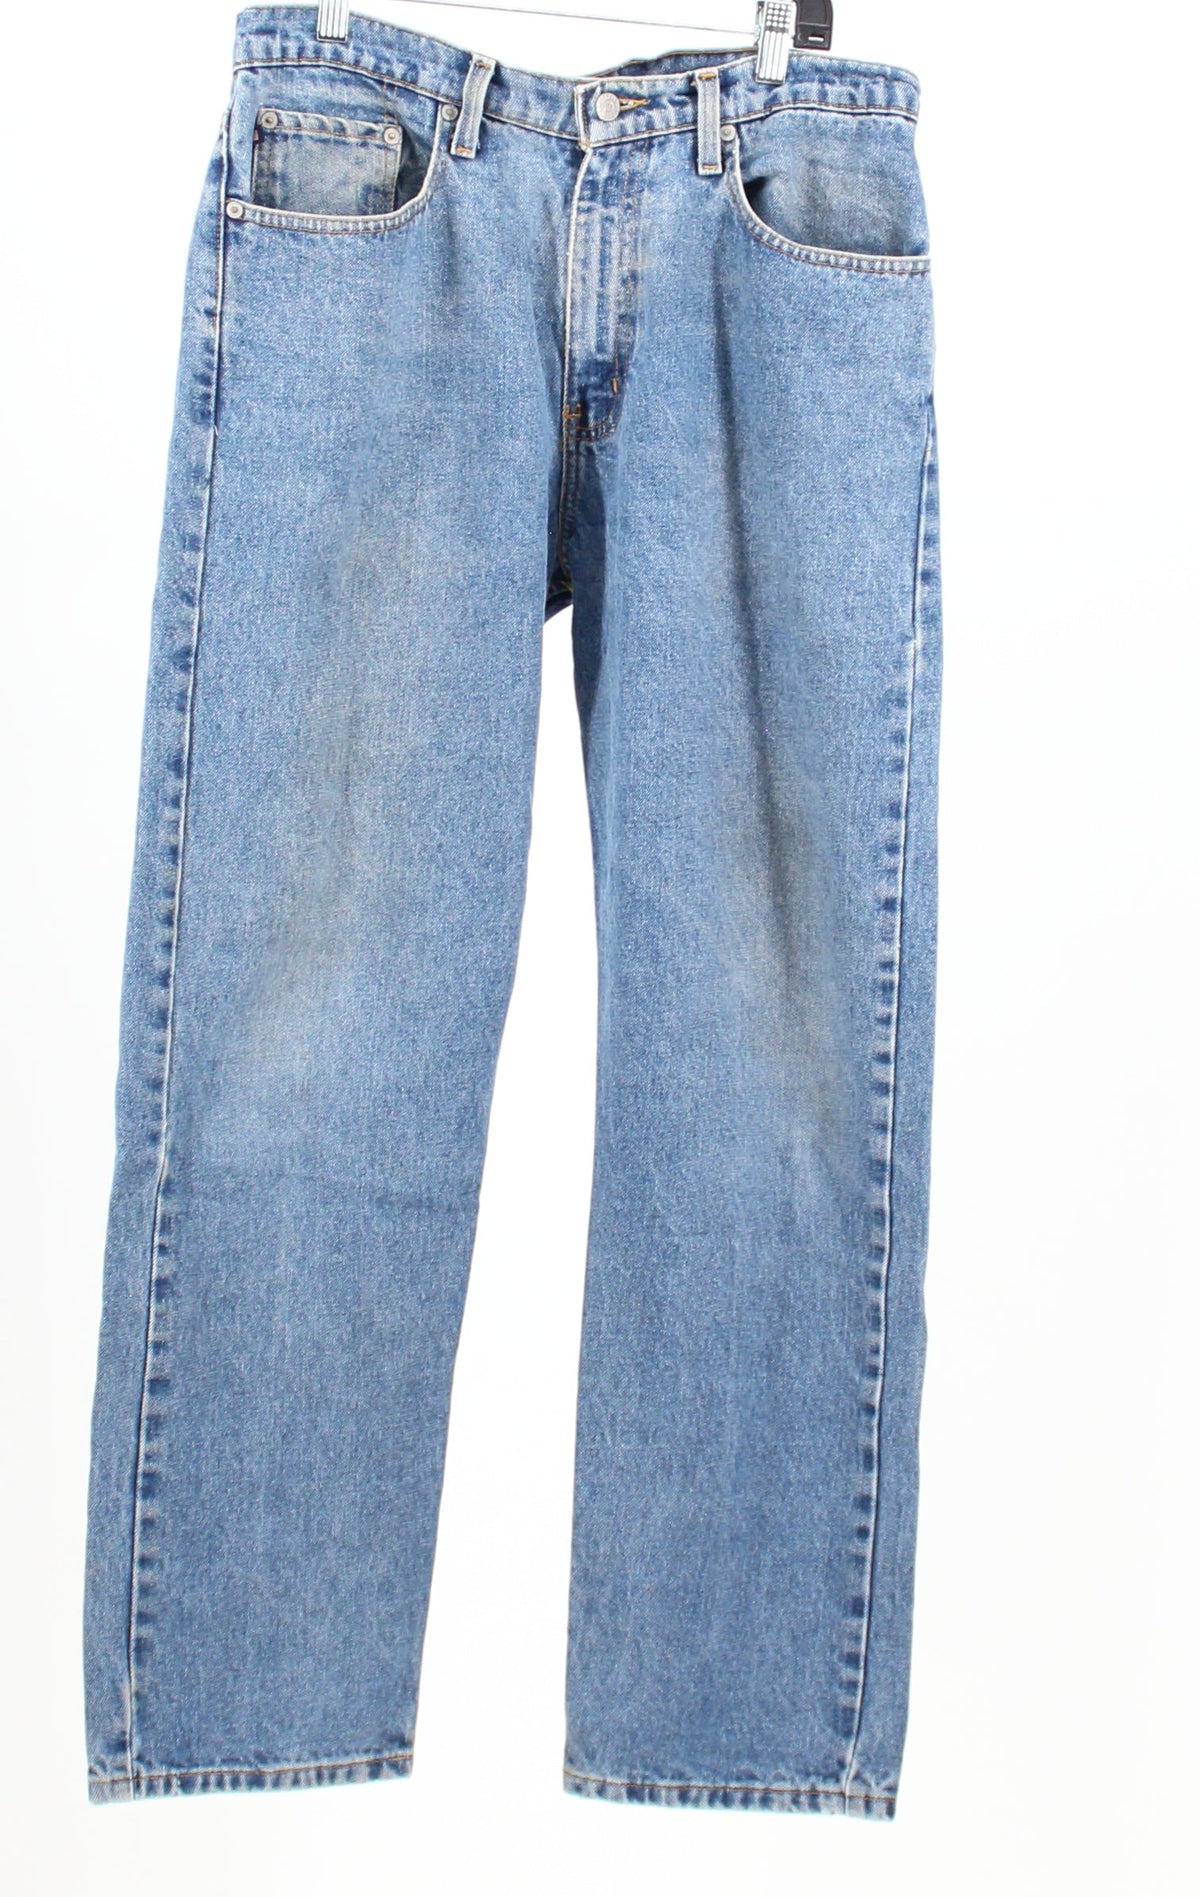 Polo Jeans Company Medium Washed Relaxed Fit Denim Jeans